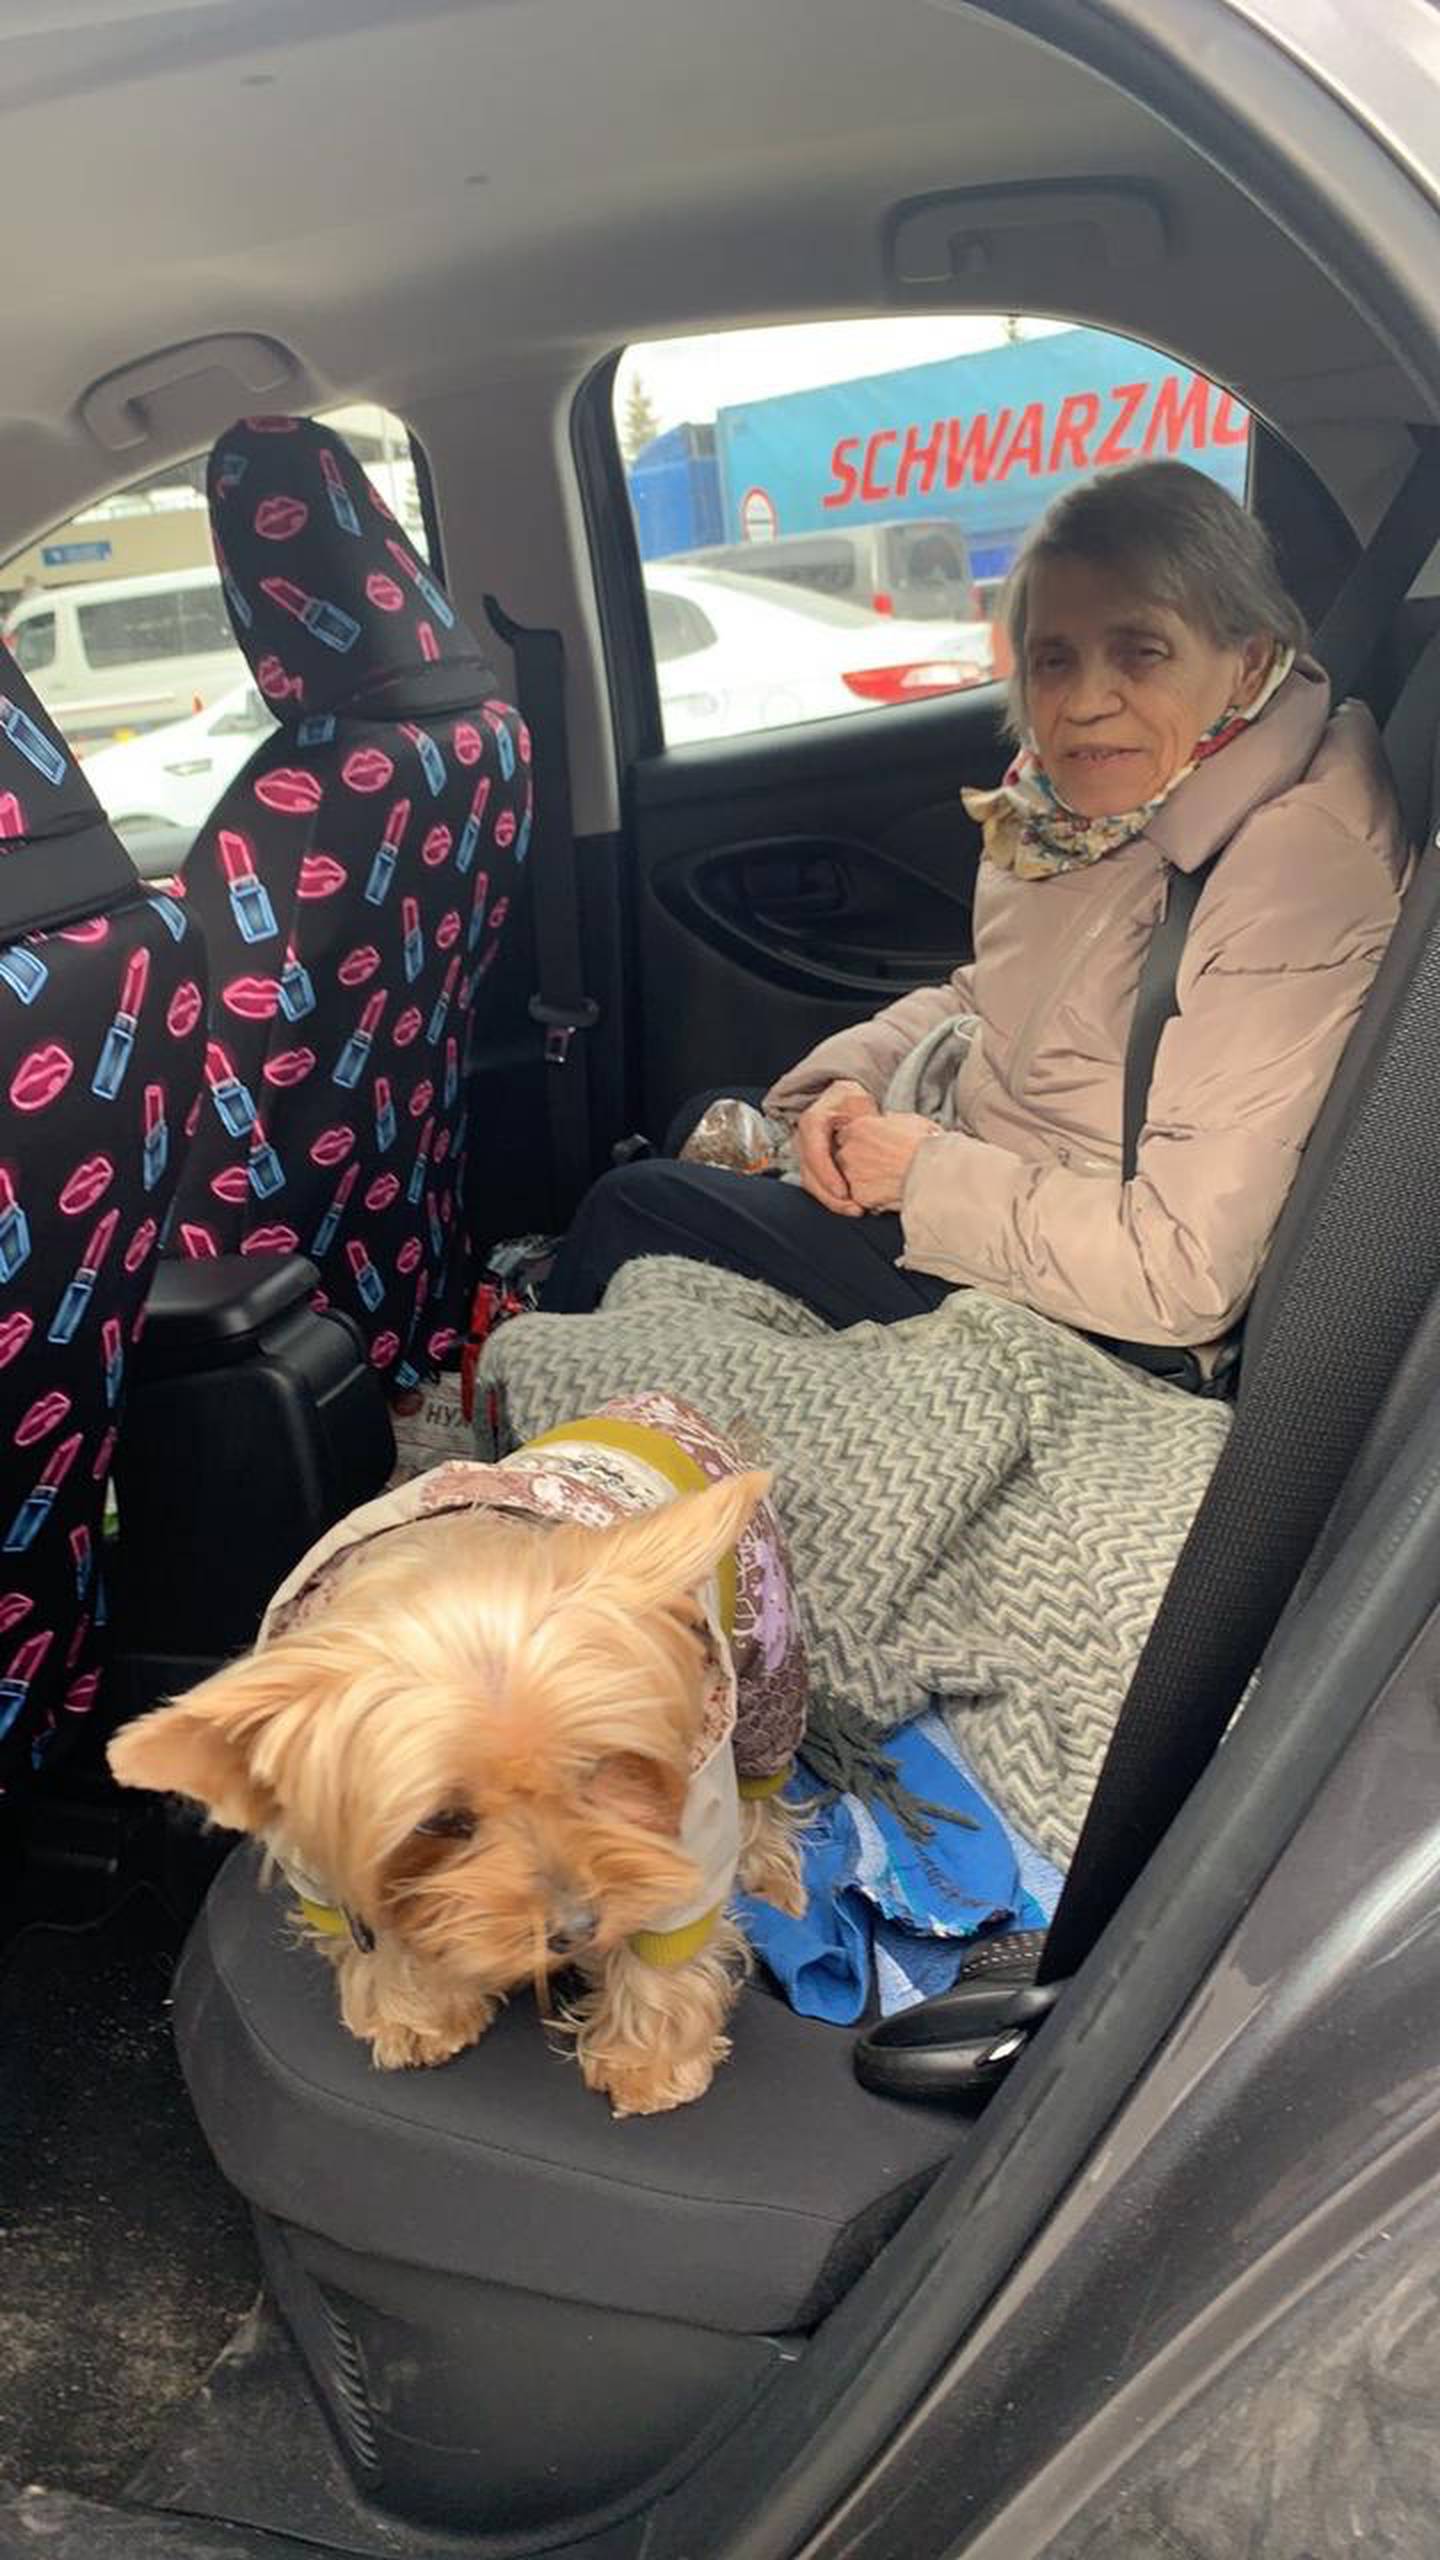 Ukrainian national Svitlana Genina travelled for four days with her mother of 82, pictured, and sister with little food and no place to sleep save for the car. Photo: Svitlana Genina